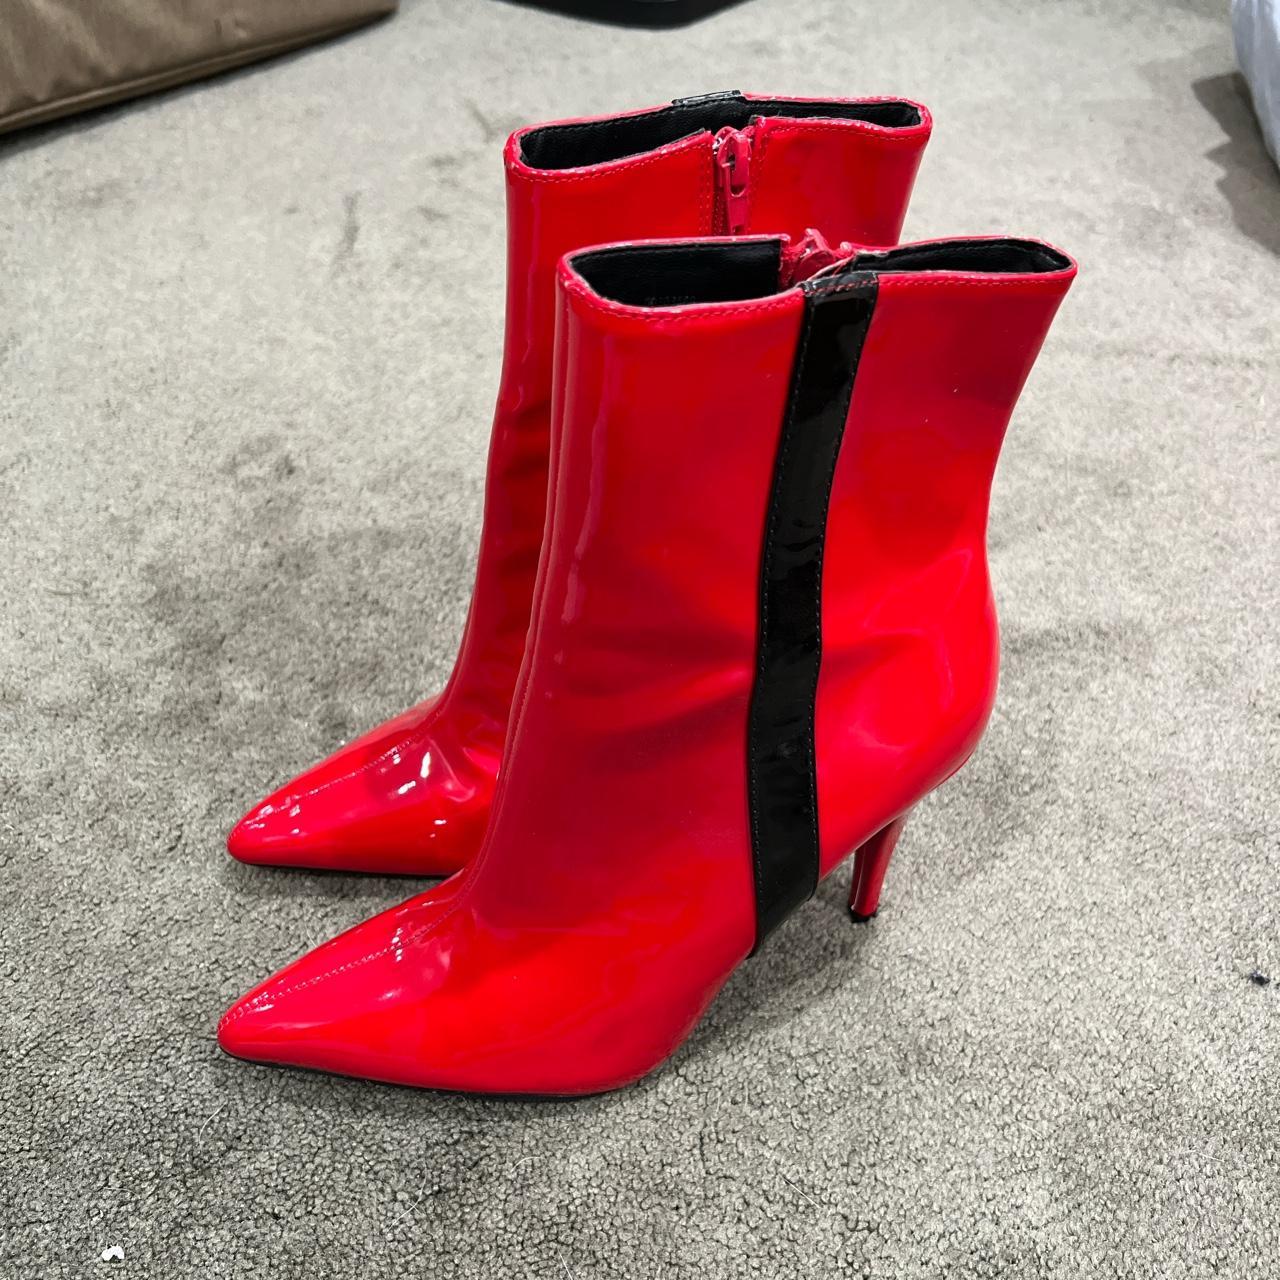 Forever 21 Women's Red and Black Boots | Depop